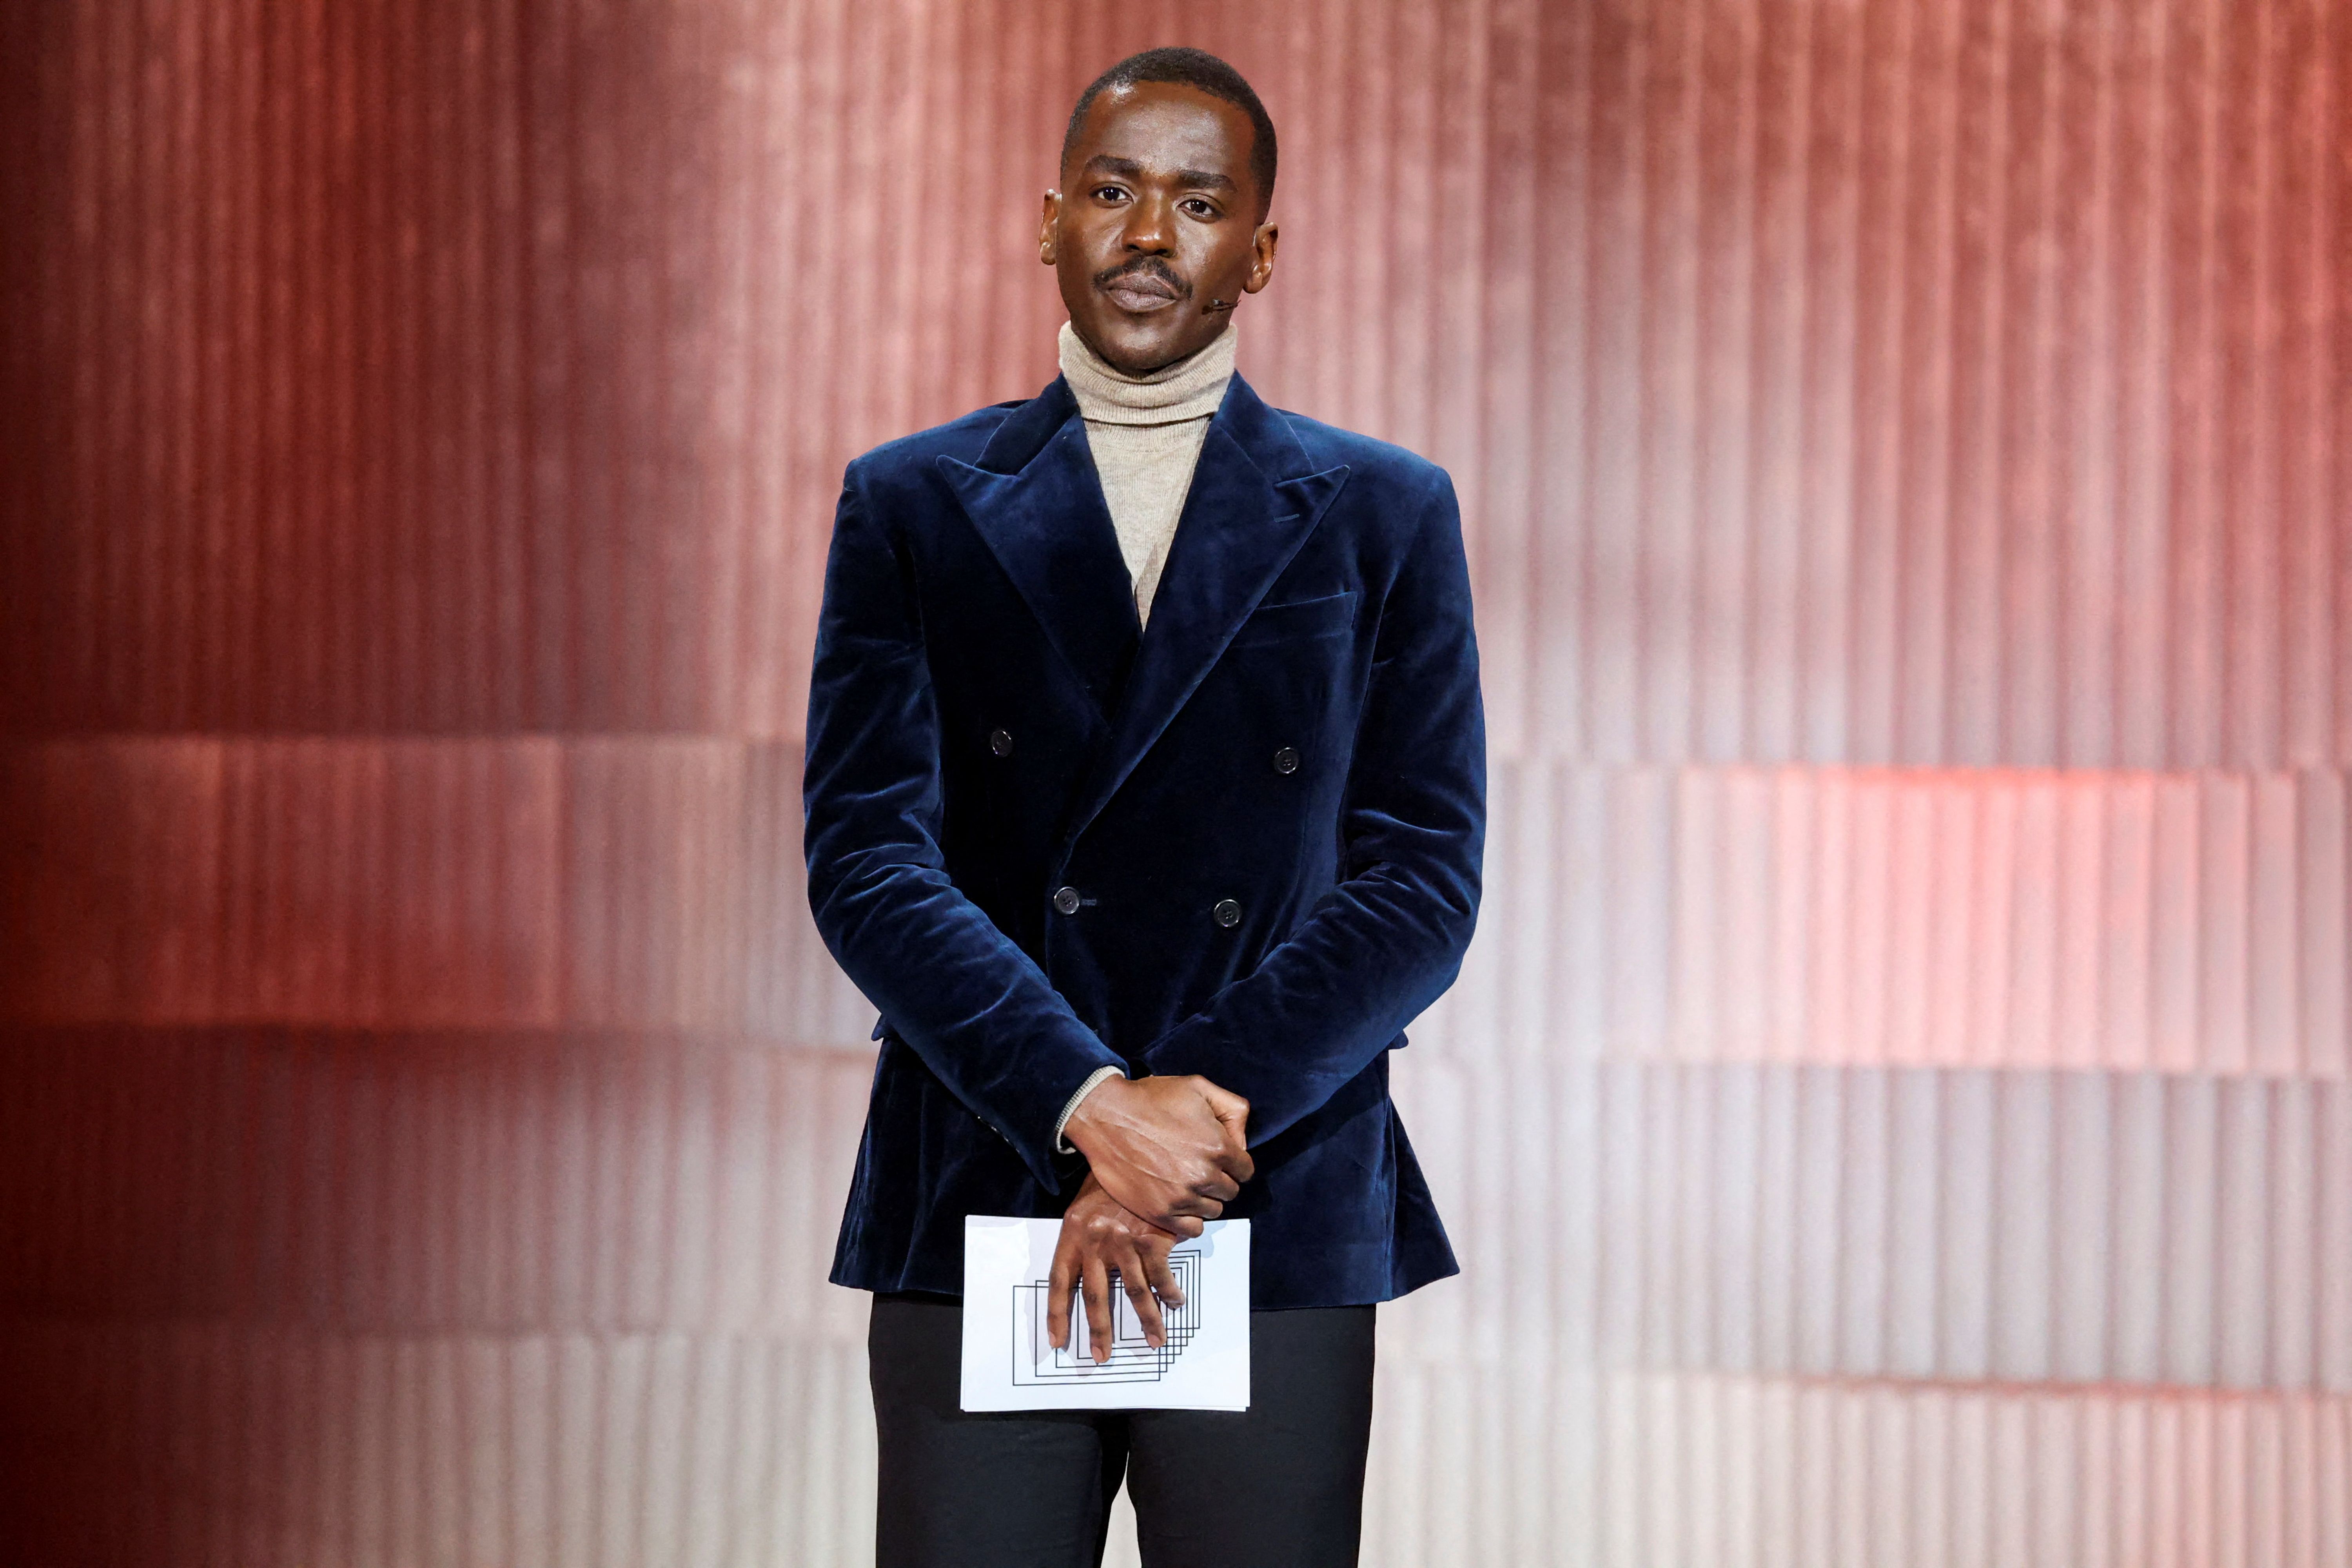 Rwandan-Scottish actor Ncuti Gatwa stands on stage during the 34th European Film Awards ceremony in Berlin on December 11, 2021. | Source: Getty Images